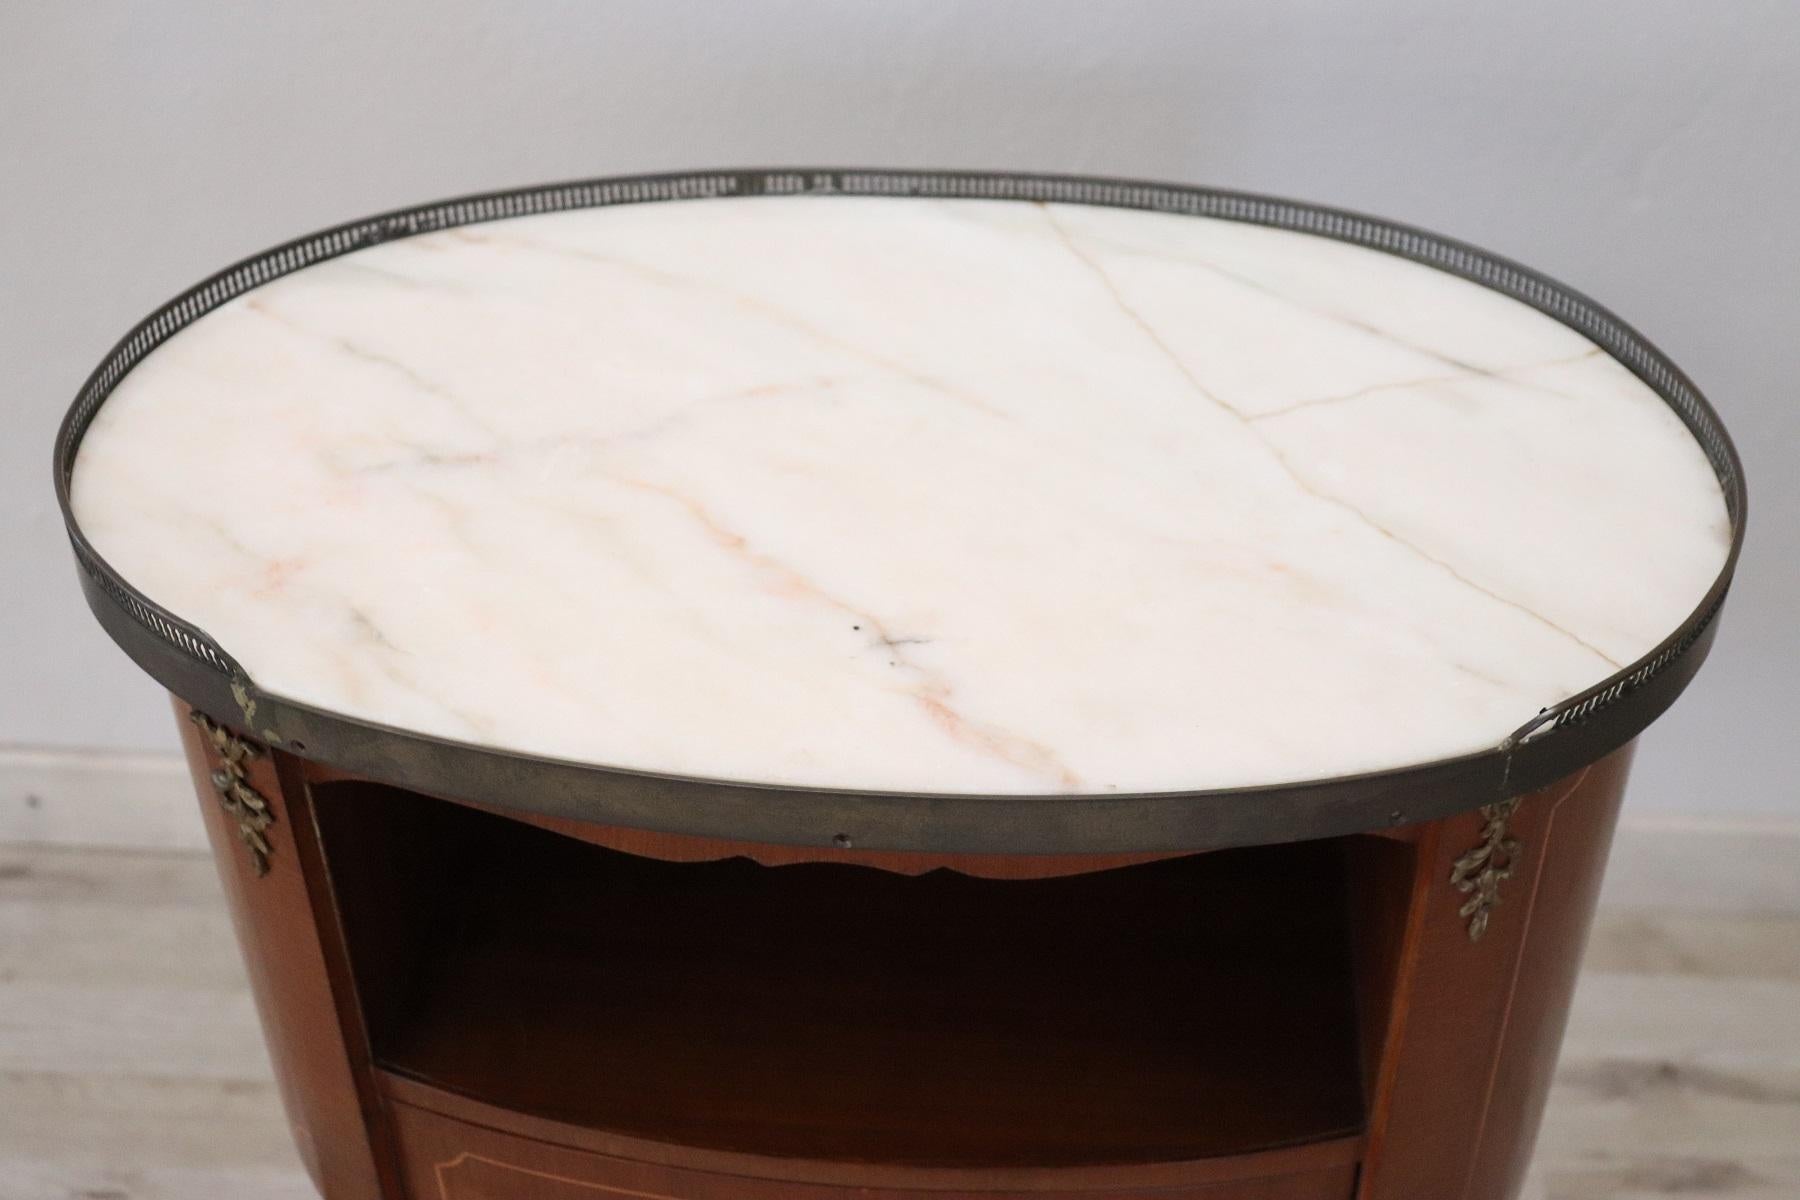 Elegant oval bedside table in Louis XV style richly adorned with gilded and chiselled bronzes with a practical drawer on the front and a storage compartment. The top is in white marble with light and delicate veins on the gray and pink present a